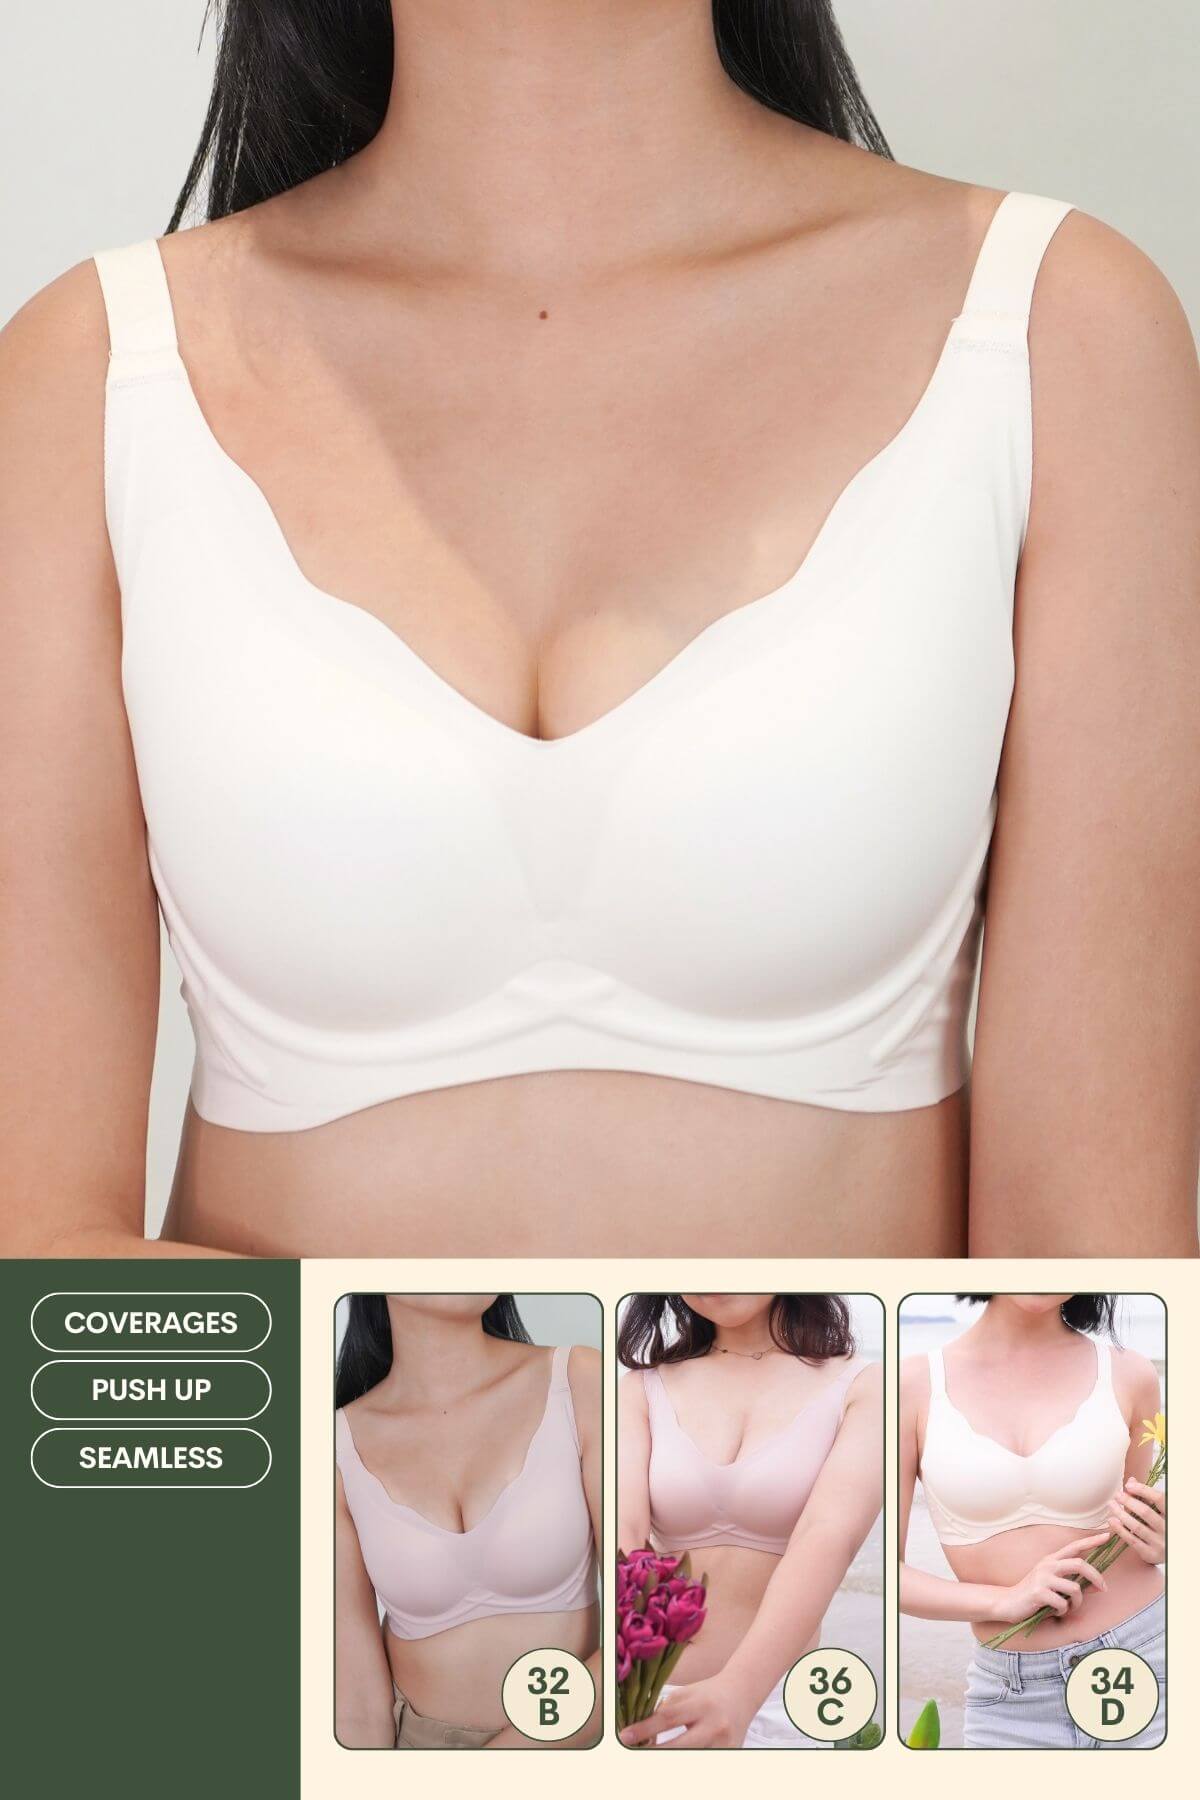 [Star Product] Wavy Support Antigravity Seamless Bra In Milky White - Adelais Official - Bra - Coverage & Push Up & Seamless